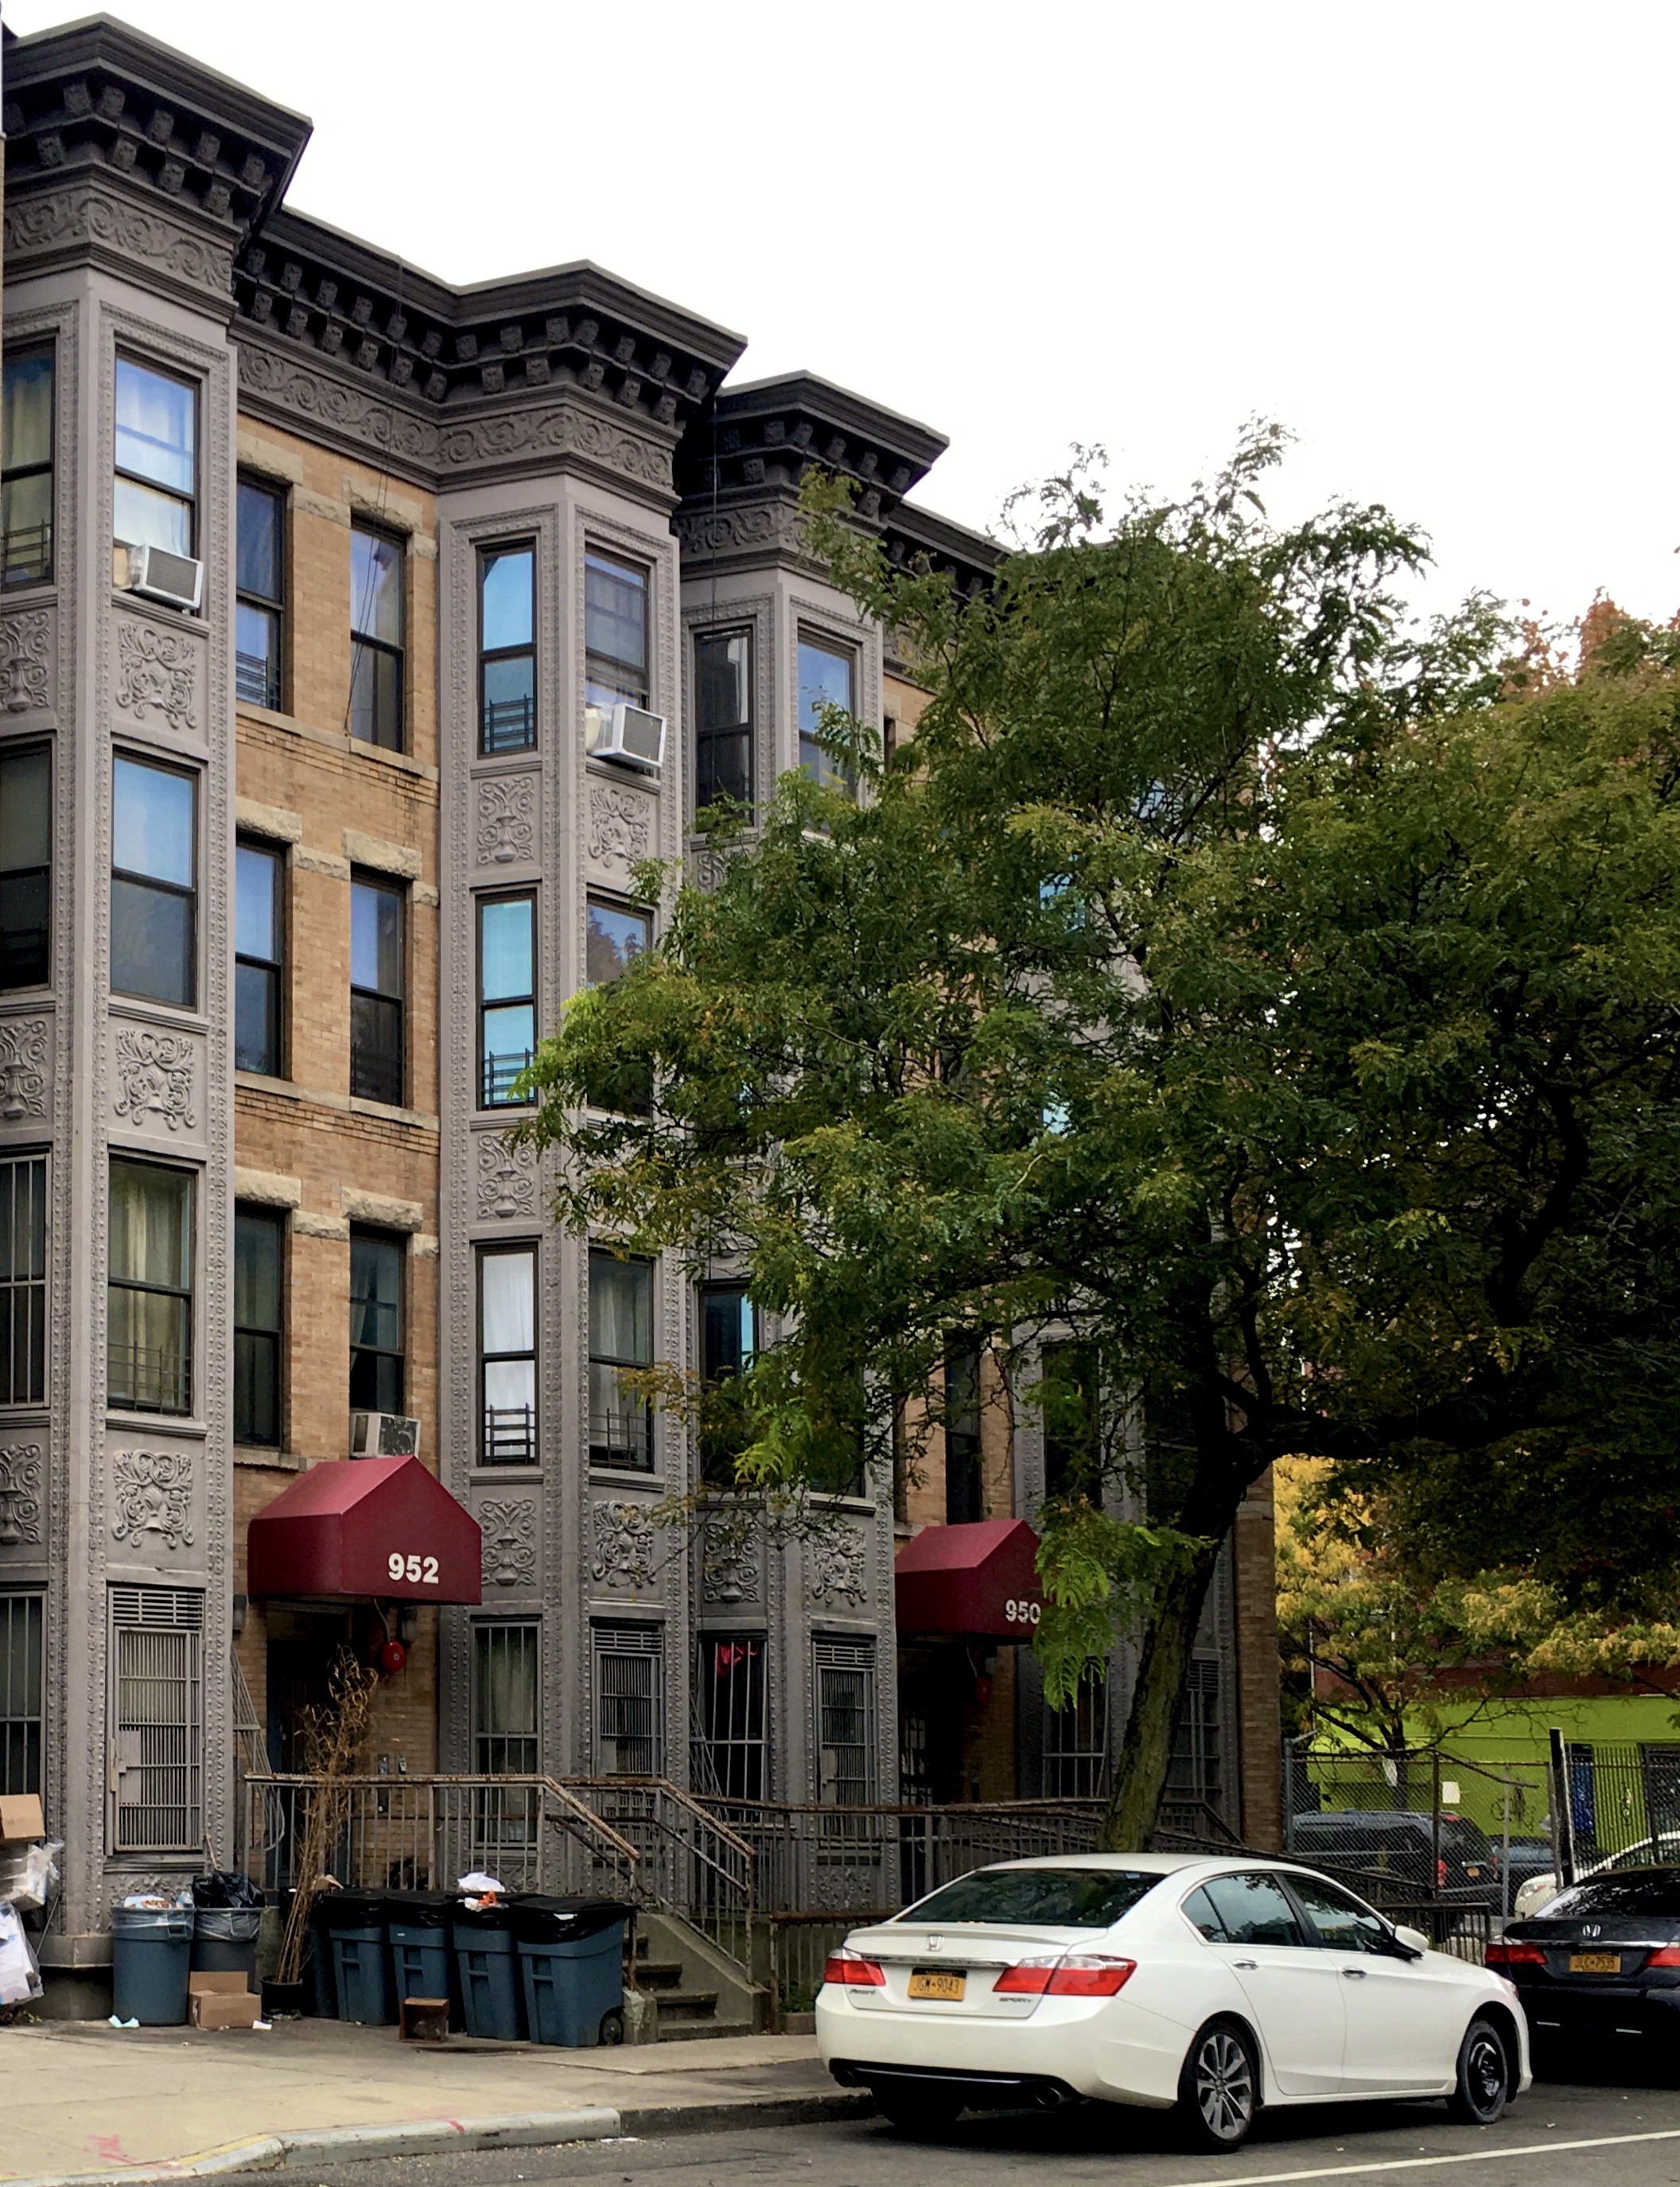 These Bergen Street buildings with distinctive metalwork were constructed in 1892. Eagle photo by Lore Croghan